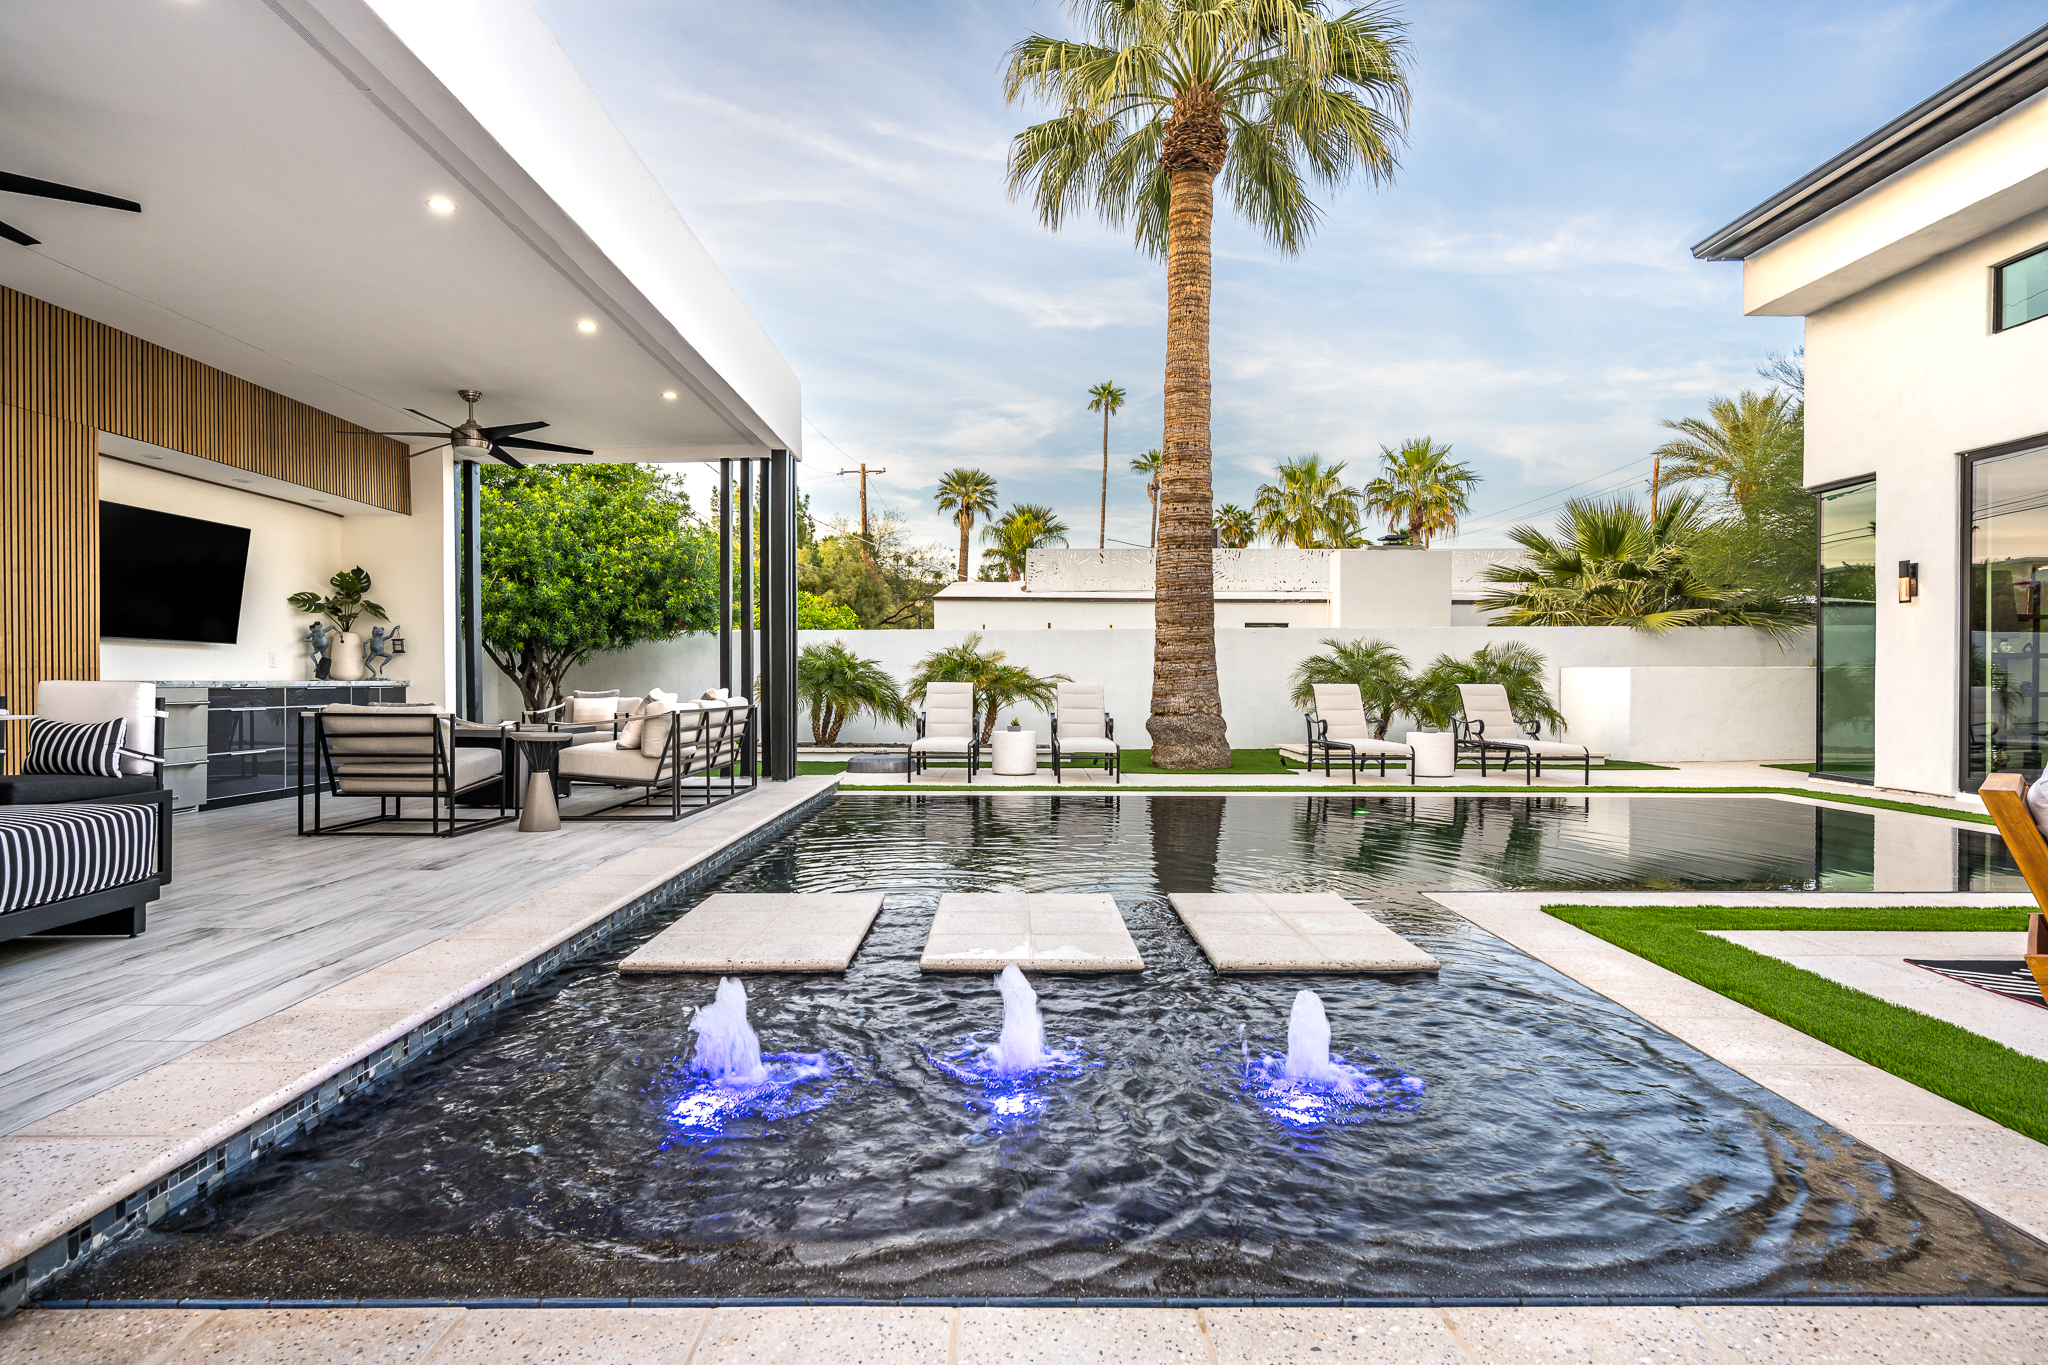 Adding Value to Your Home with a New Swimming Pool